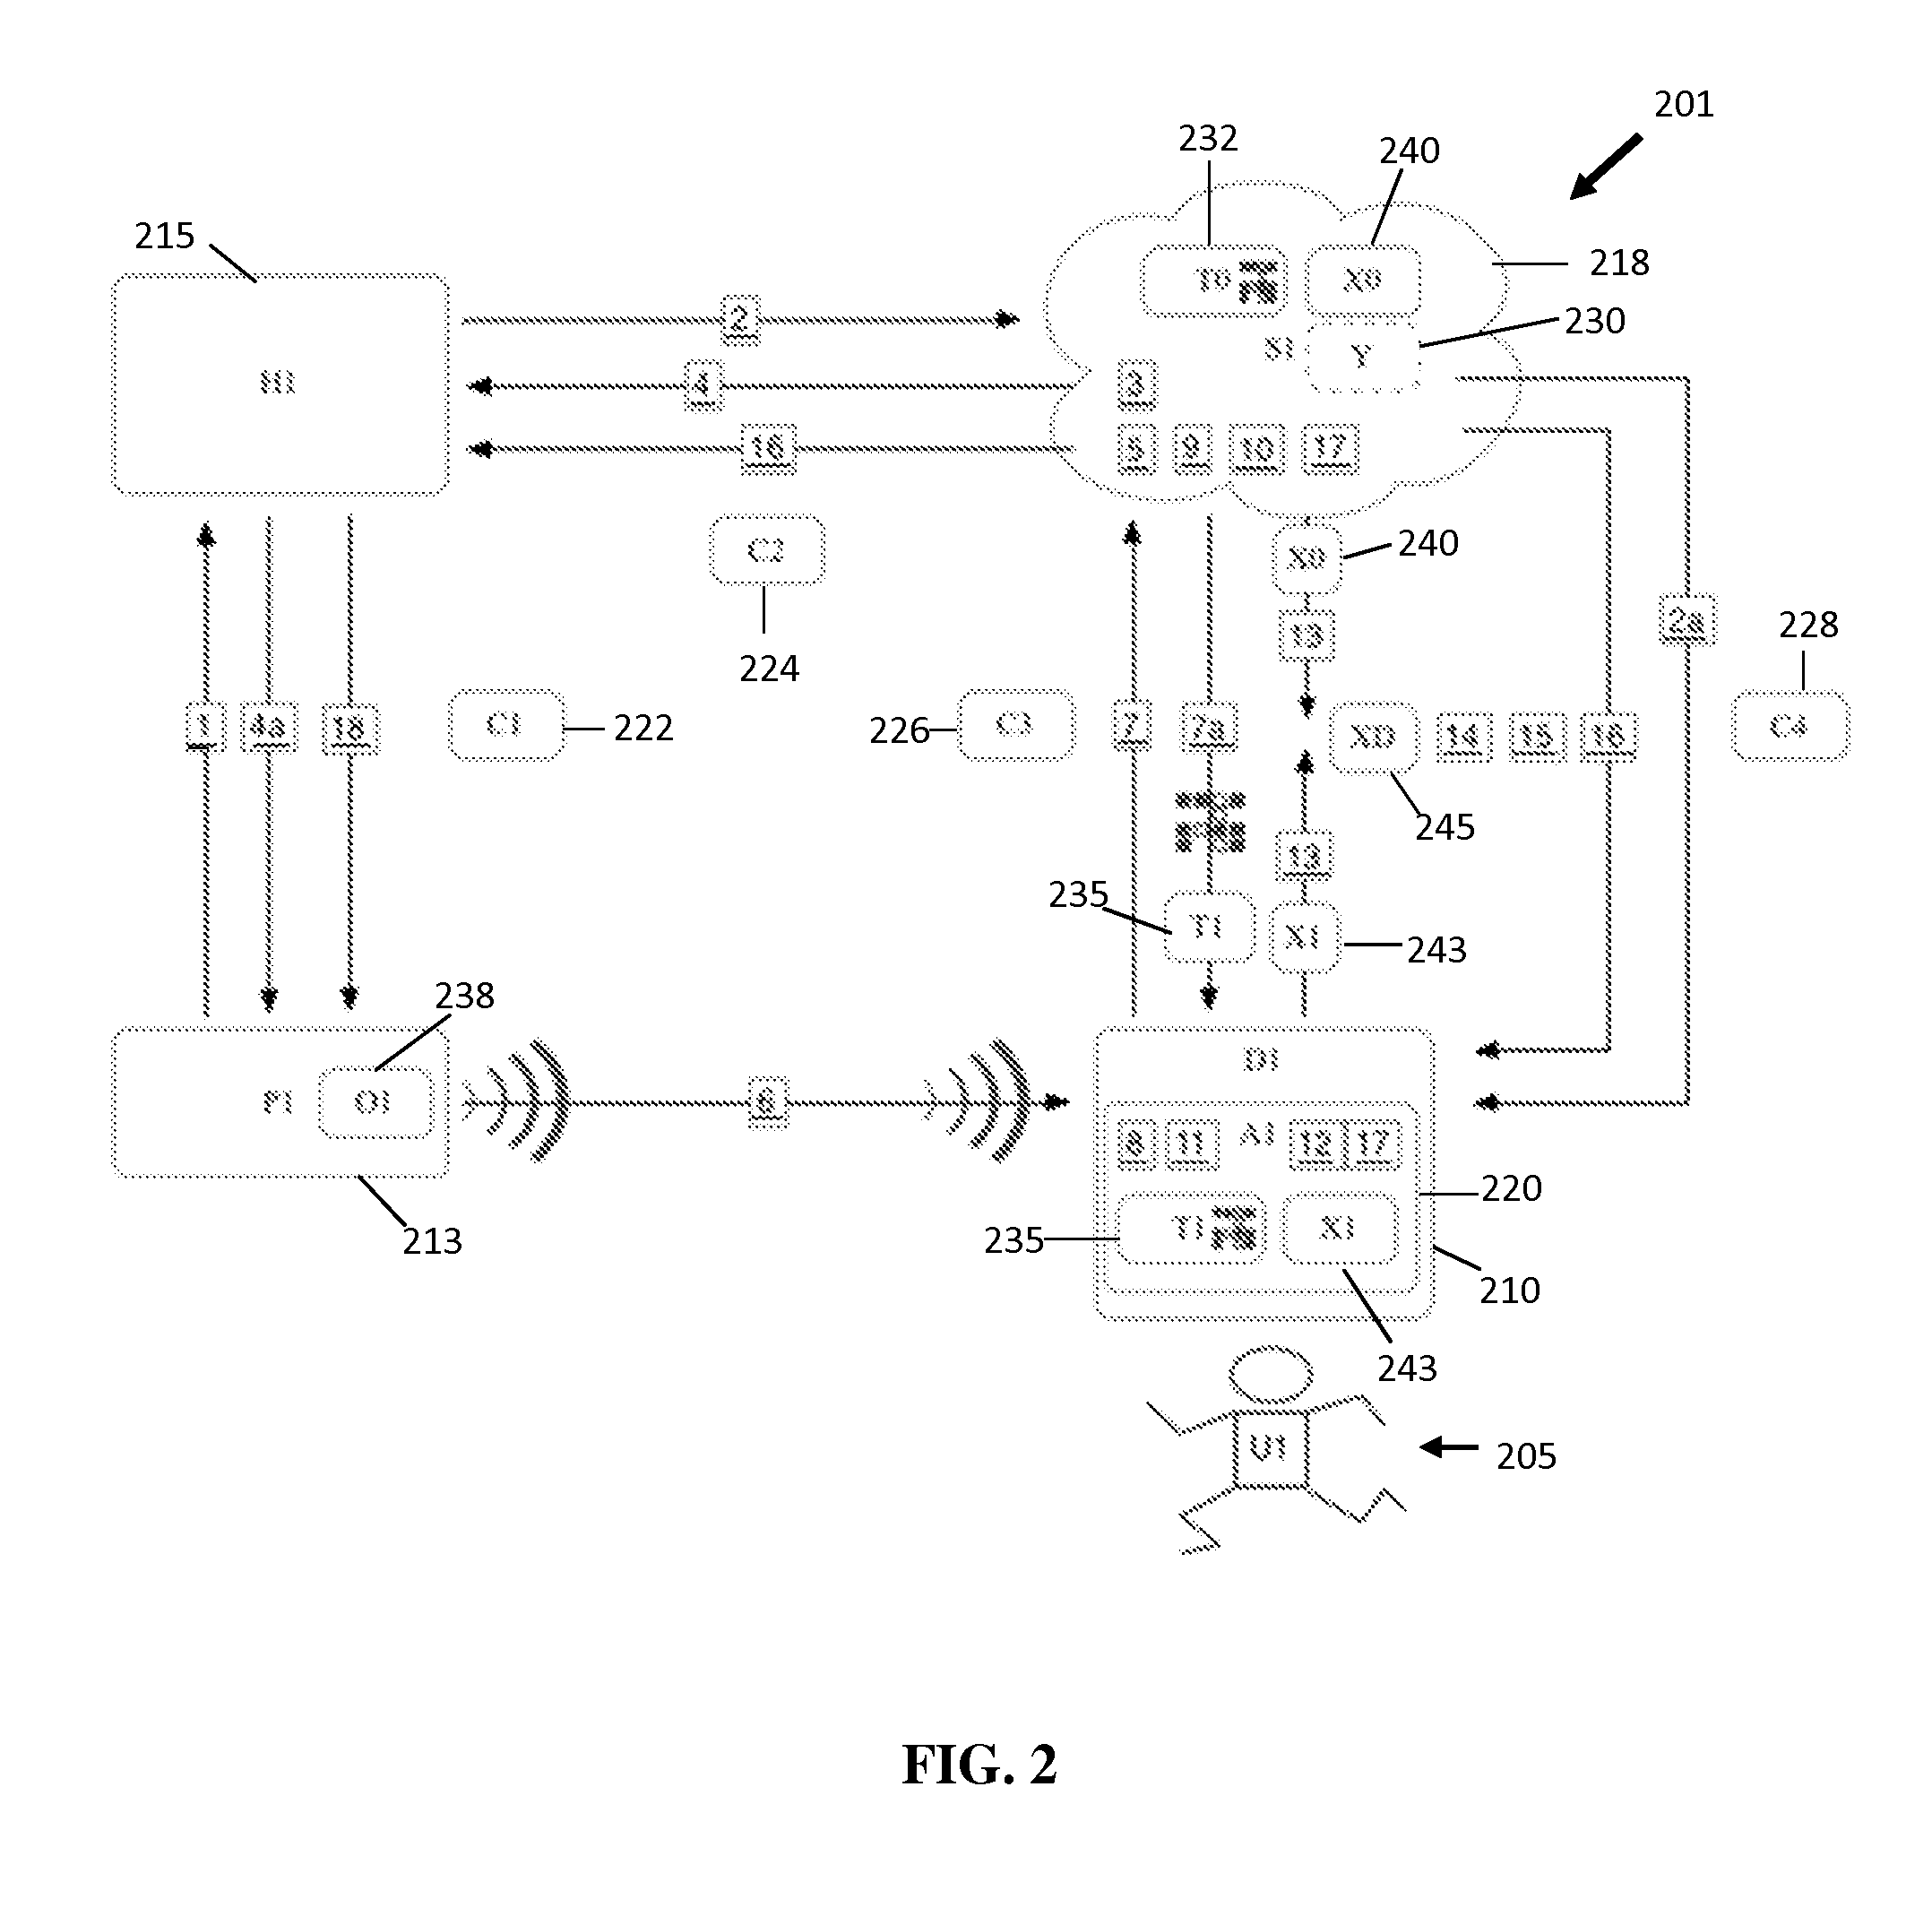 Method for mobile security via multi-factor context authentication